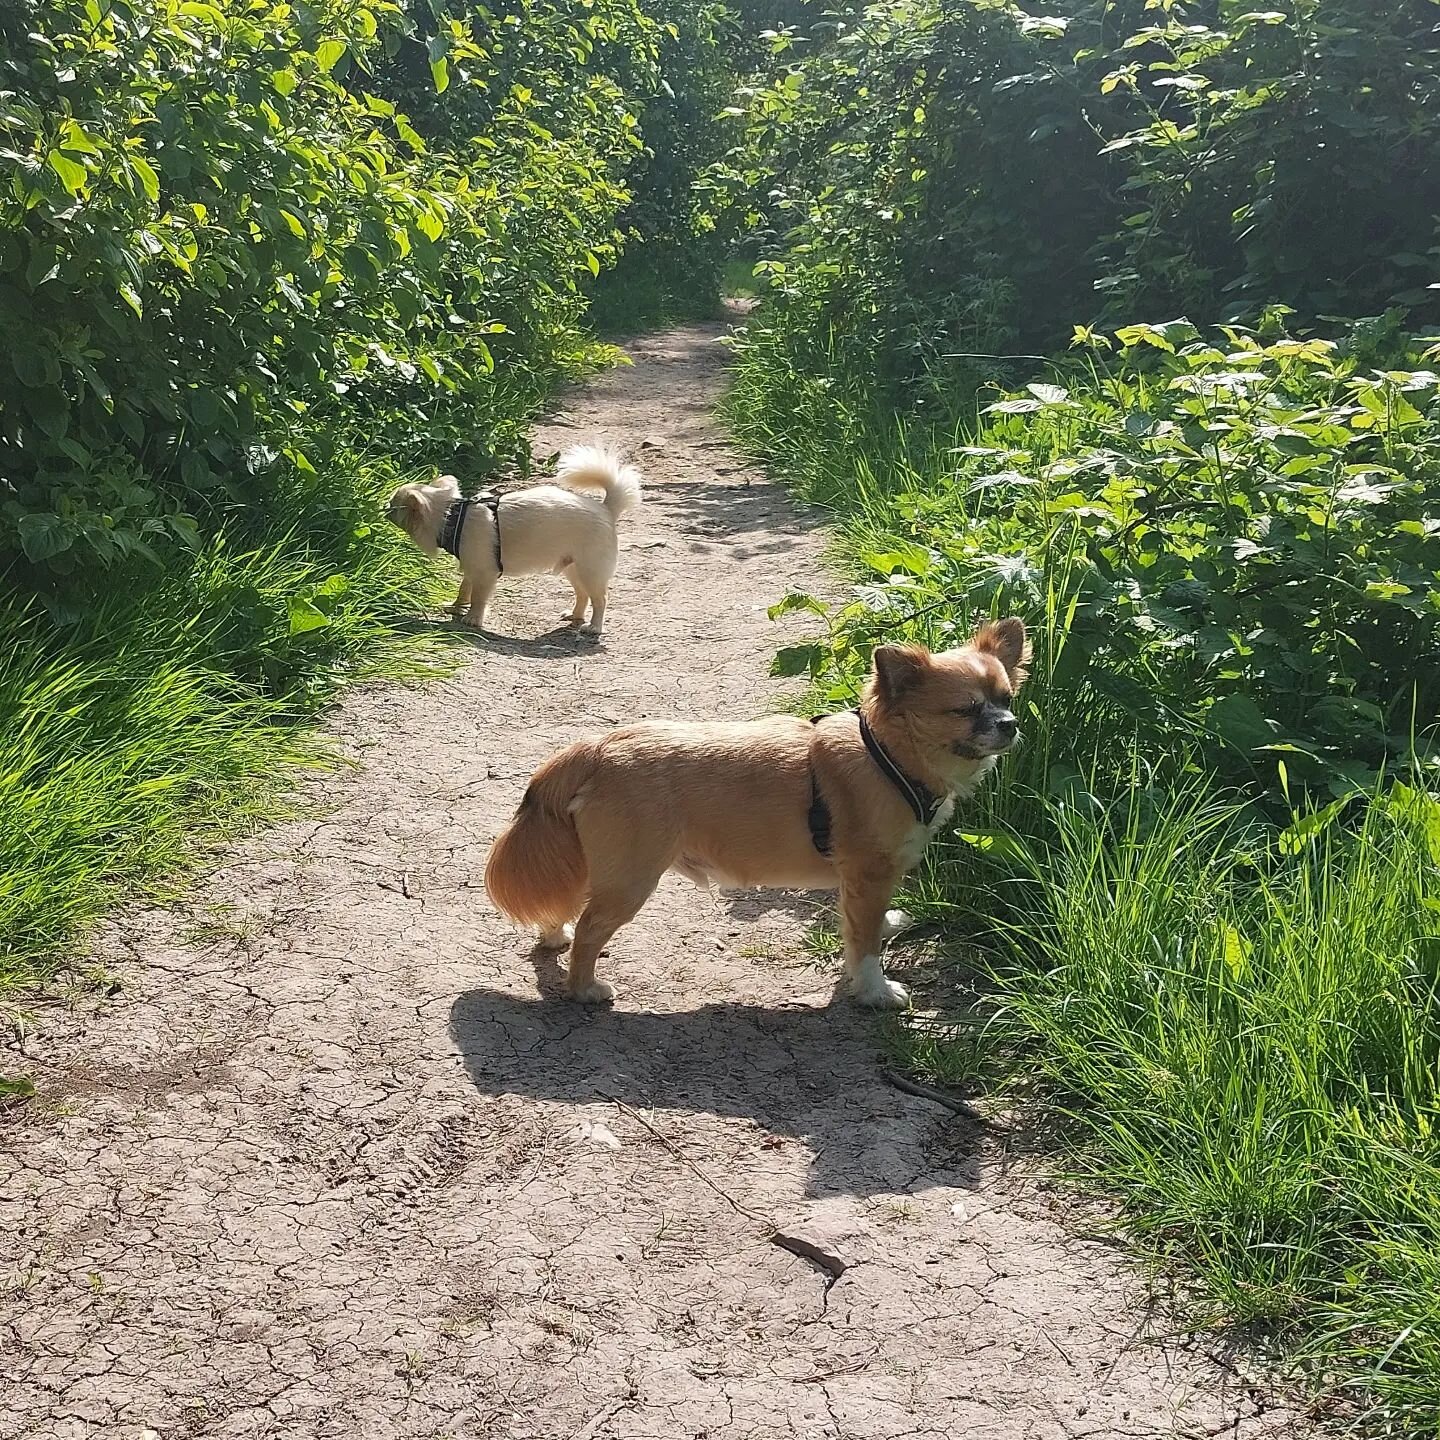 If you go down to the wood today...

#dogsofinsta #portsmouthdogsofinstagram #dogwalkersofinstagram #portsmouthdogwalker #doglife #portsmouthdogcare #puppylove #dog #dogsofinstagram #dogwalking #portsmouthdogwalks #puppy #dogoftheday #dogwalkerlife #